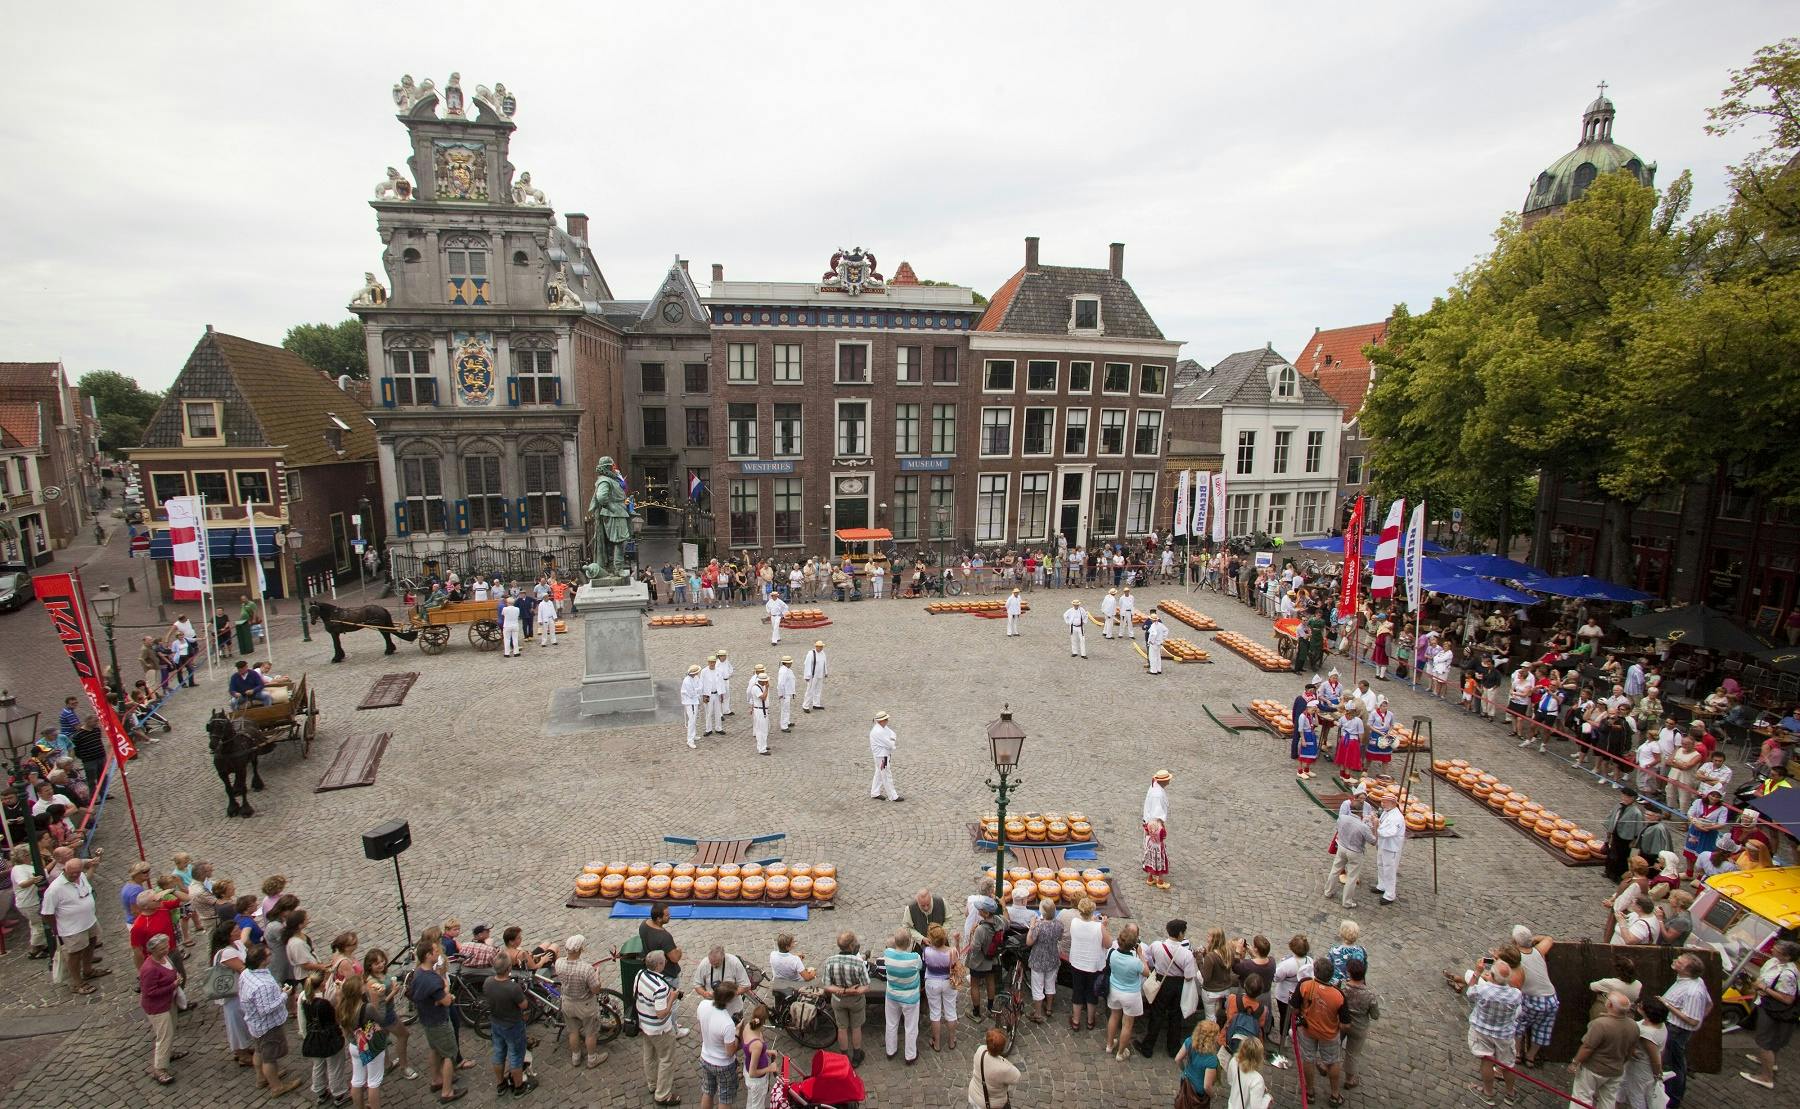 The cheese market in Hoorn